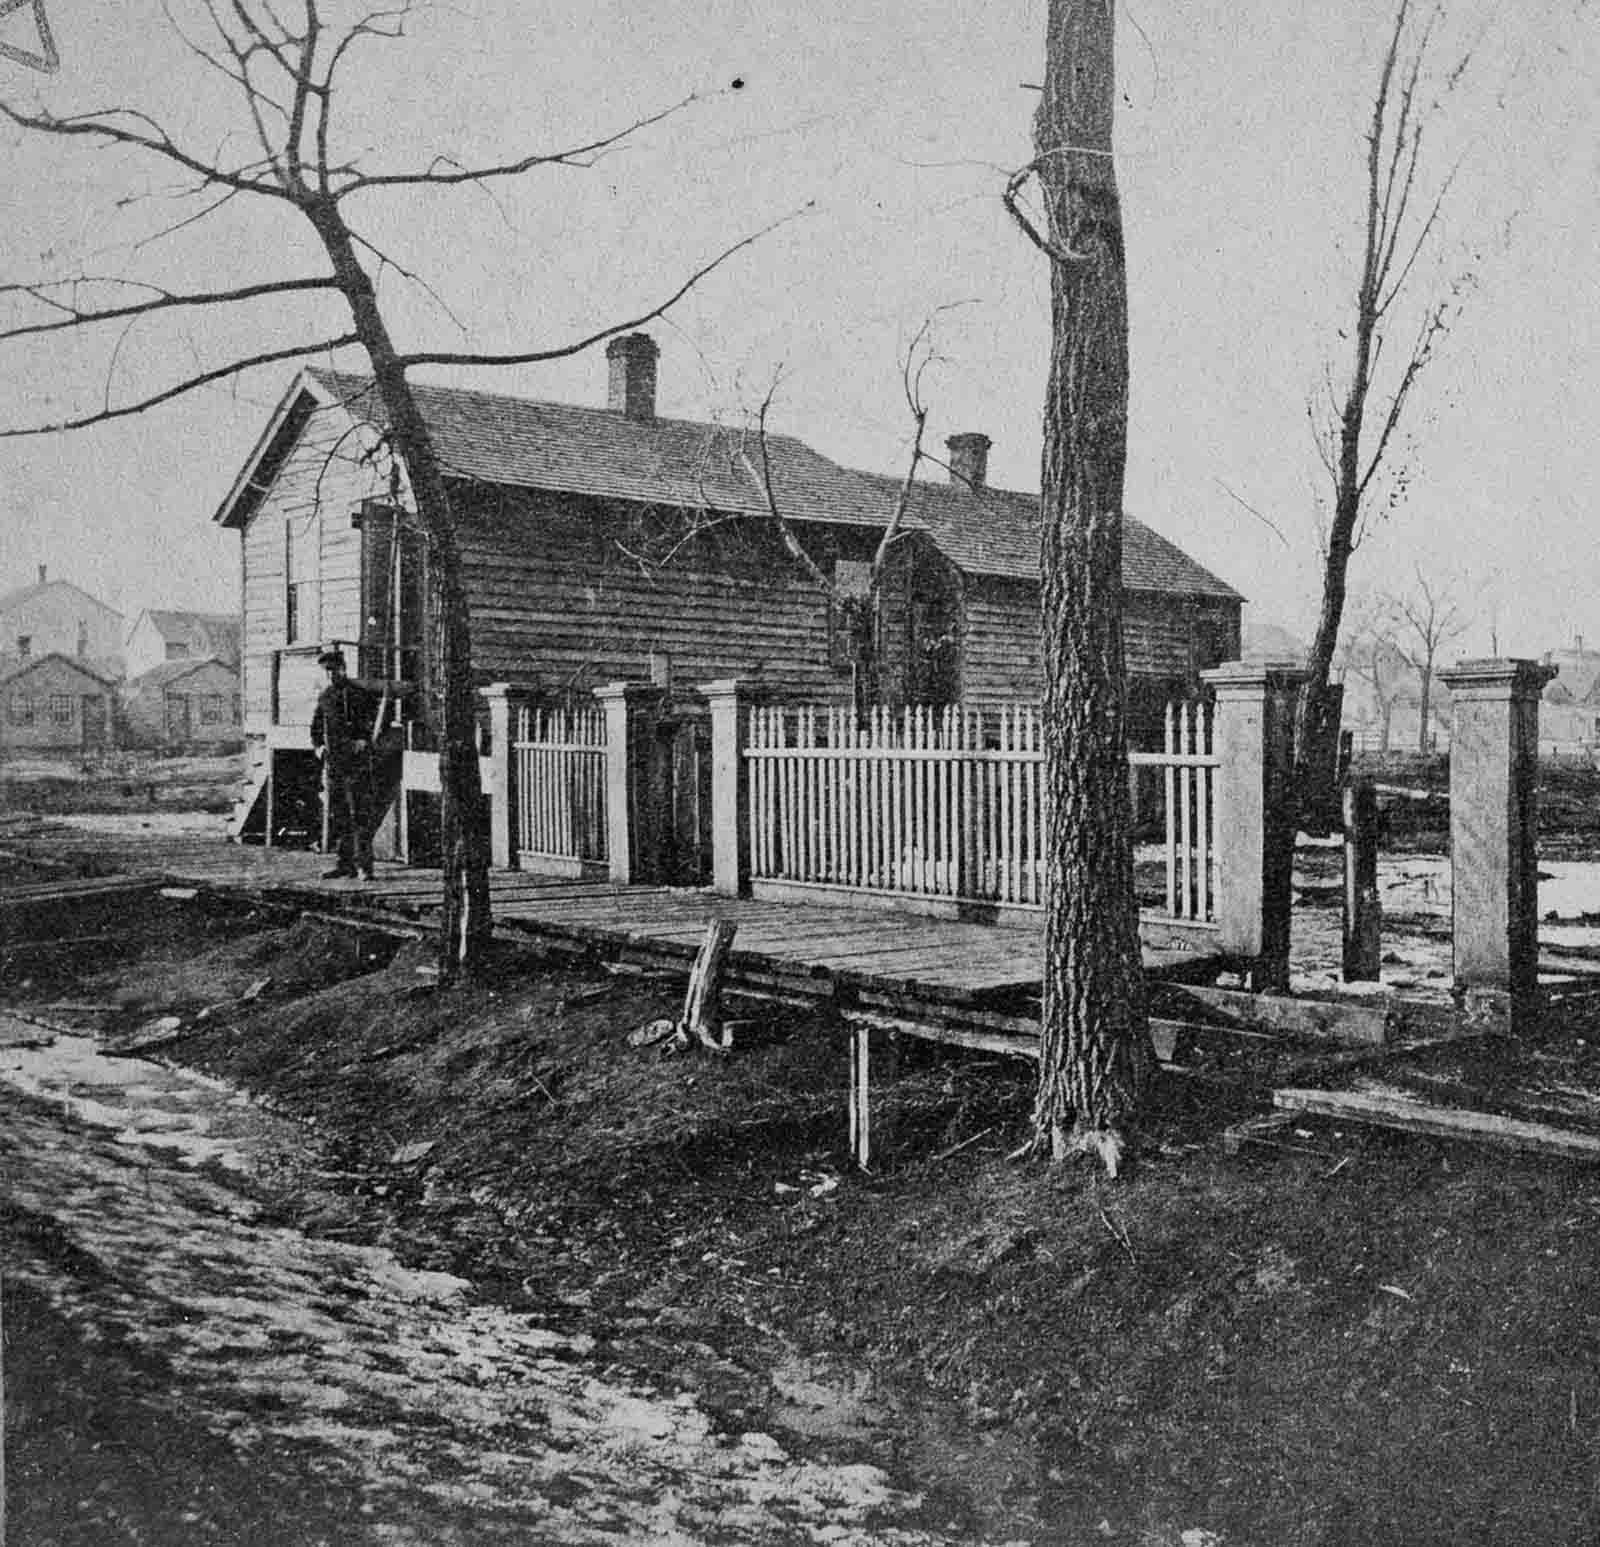 The undamaged O’Leary cottage, near the origin point of the fire.